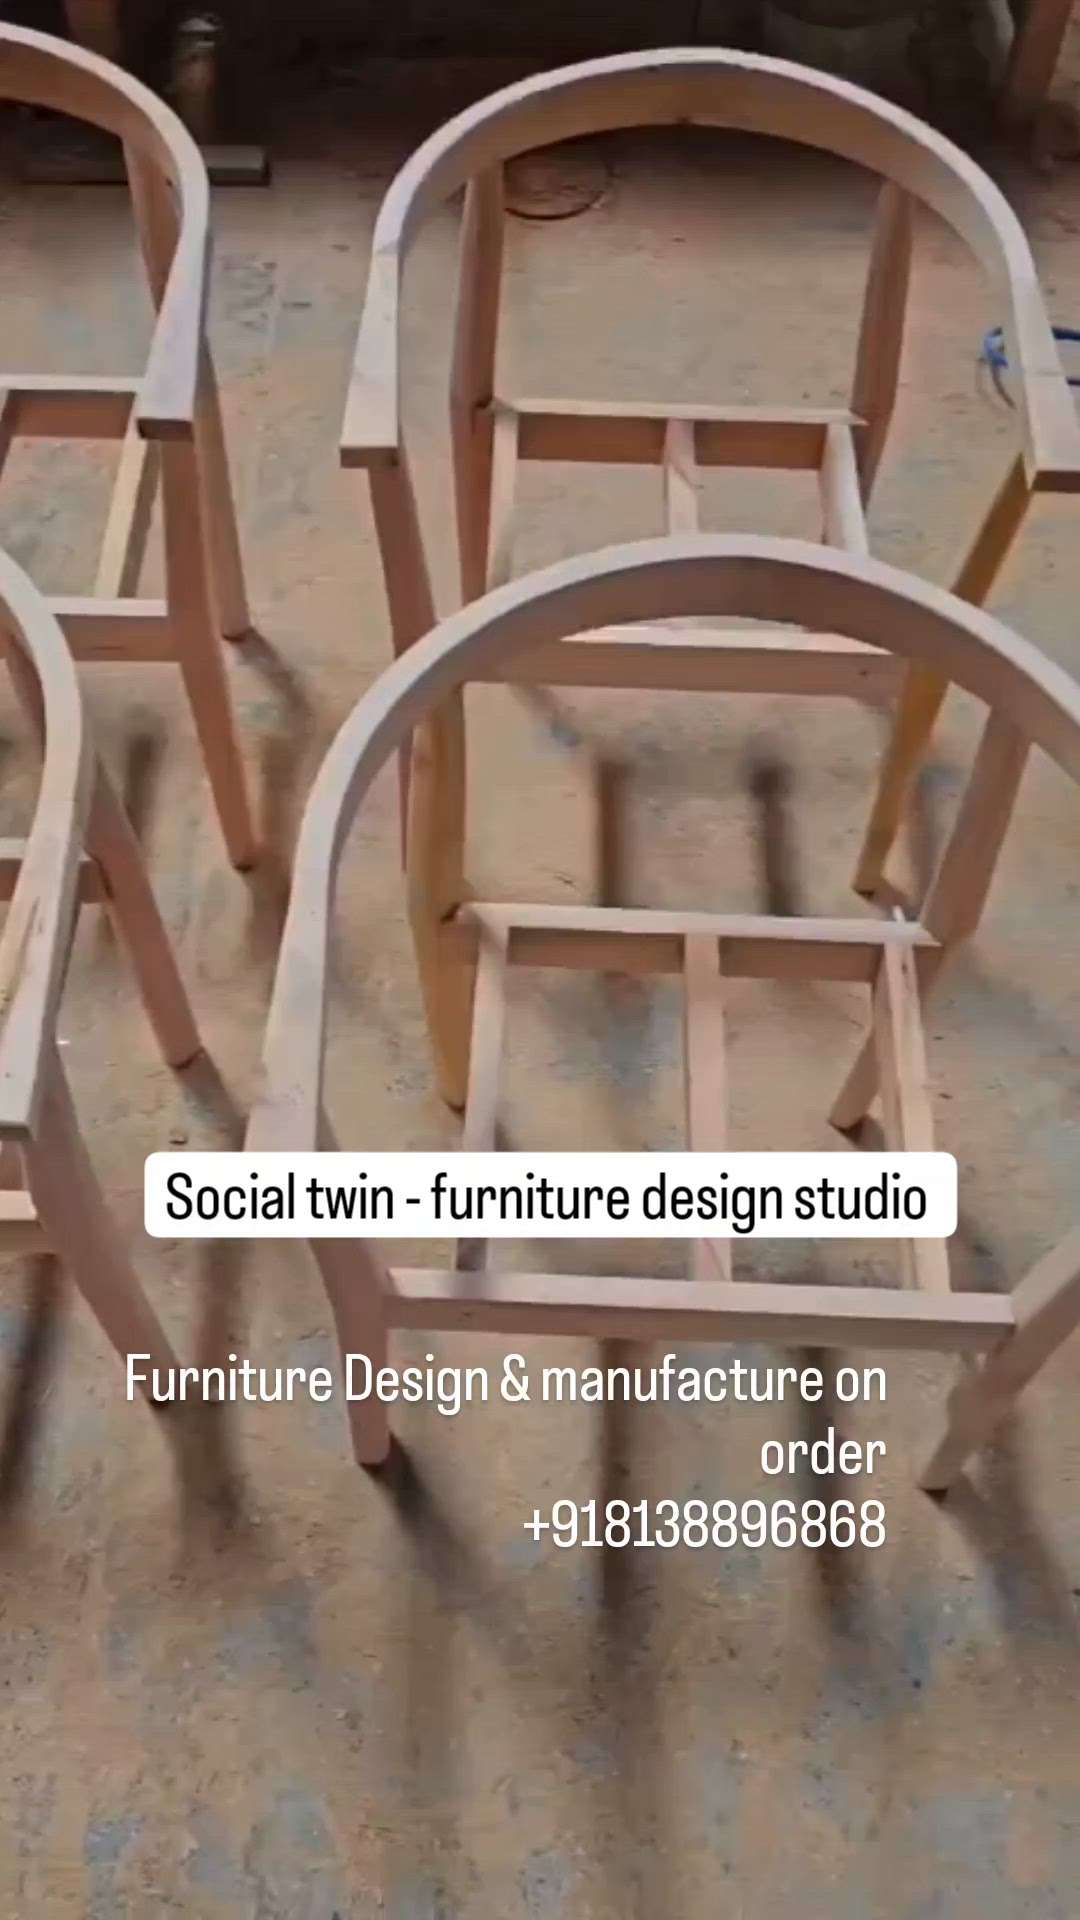 Social Twin - our sister firm focusing on product design & design furniture  studio  we custom manufacture on orders!
 We have tied up with native skilled carpenters across kerala  to deliver quality and design furniture studio #futnituremanufacturing #furnitureideas   #InteriorDesigner 
 #furniturefabric